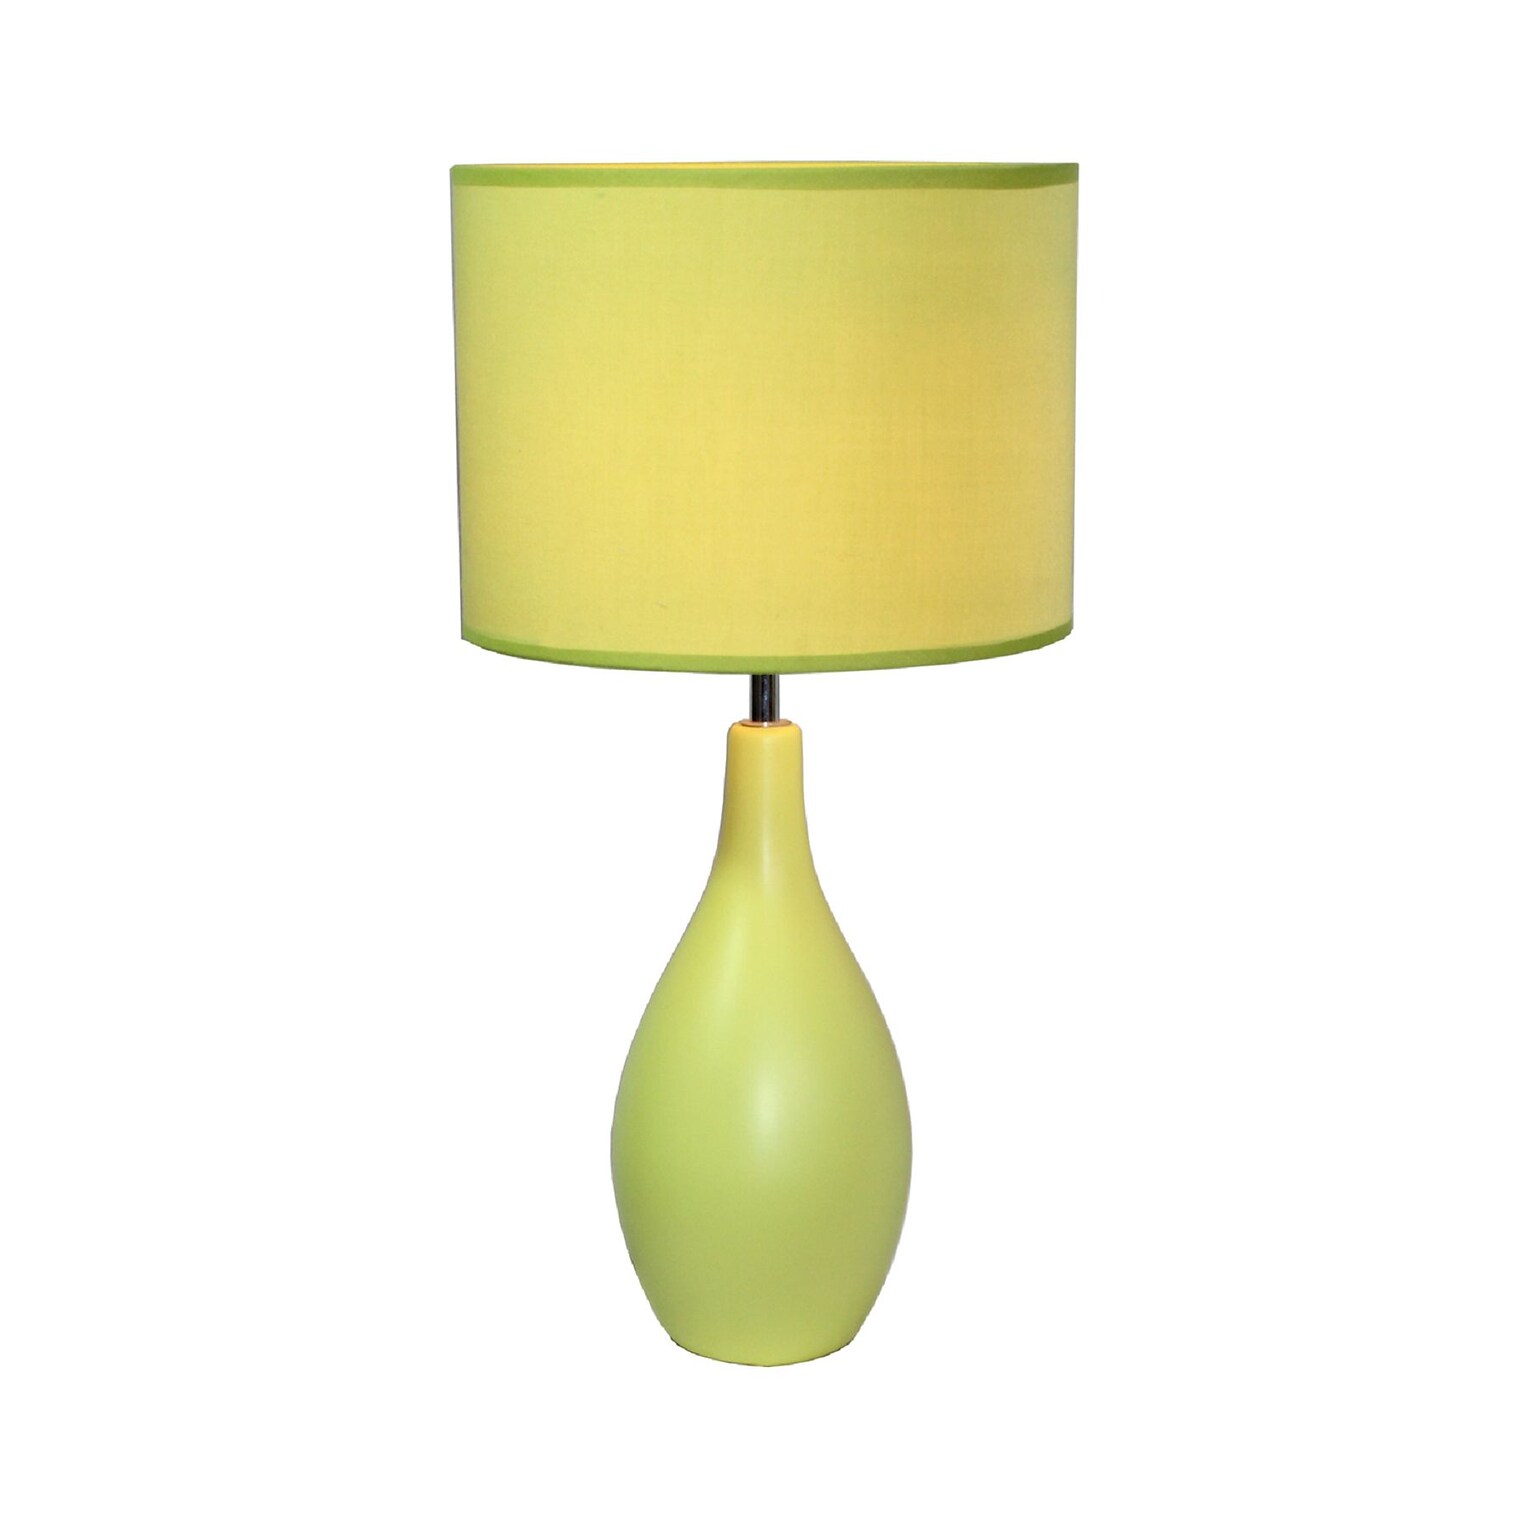 Simple Designs Oval Base Ceramic Table Lamp, Green Finish